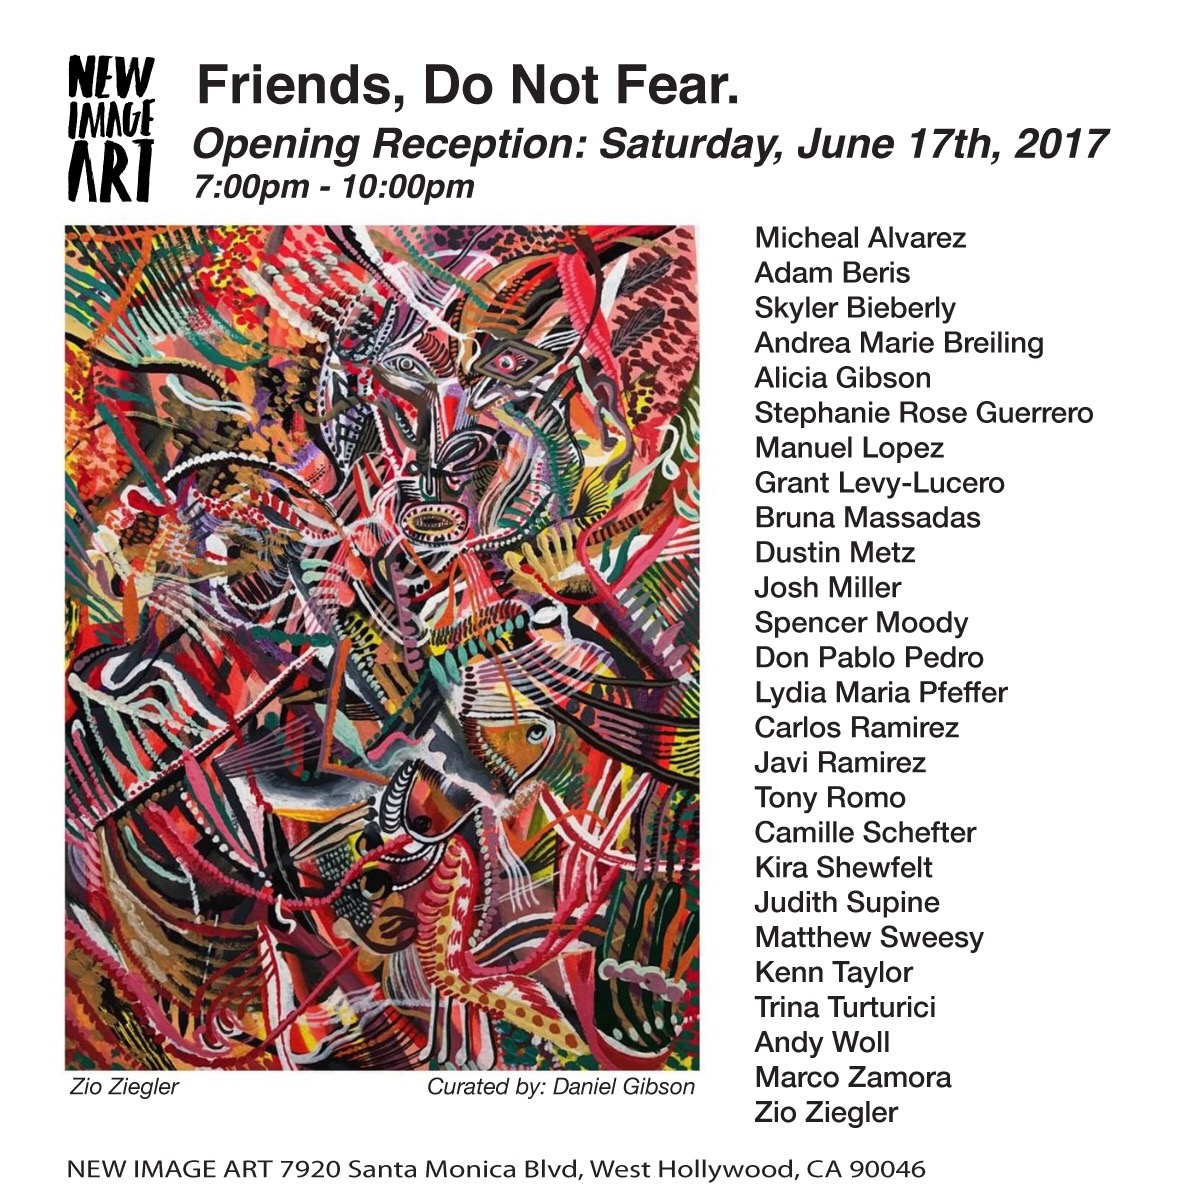 GROUP EXHIBITION - FRIENDS DO NOT FEAR